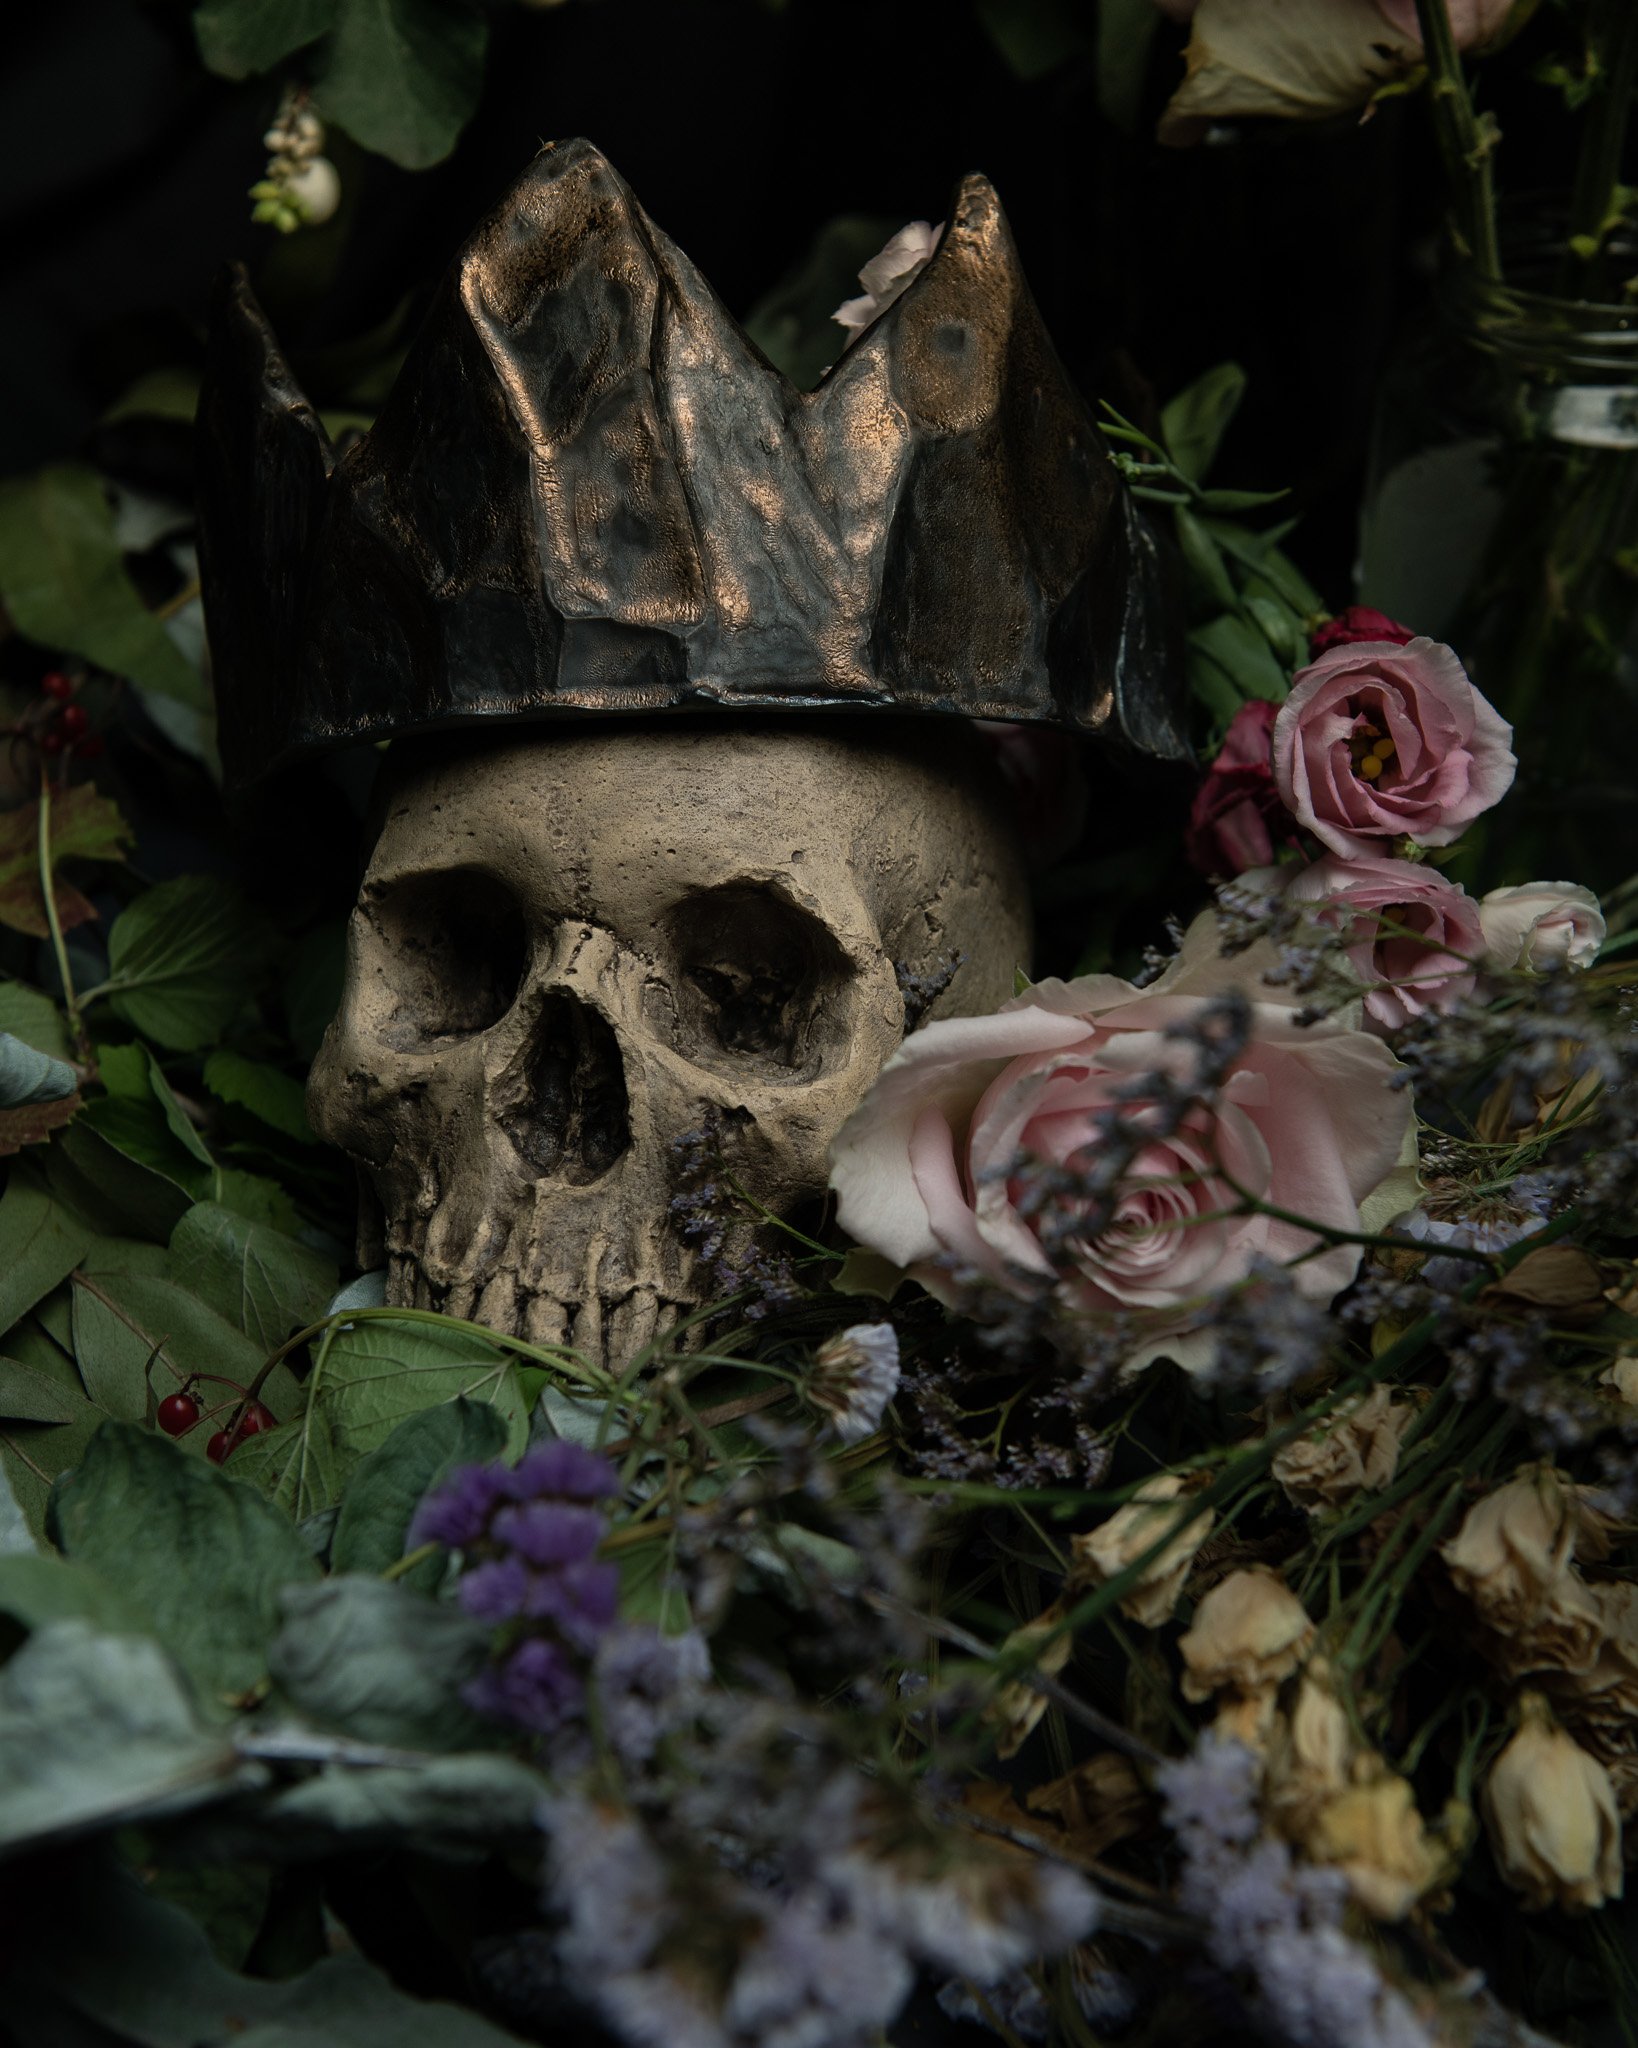 Arrangement of flowers, crown and skull